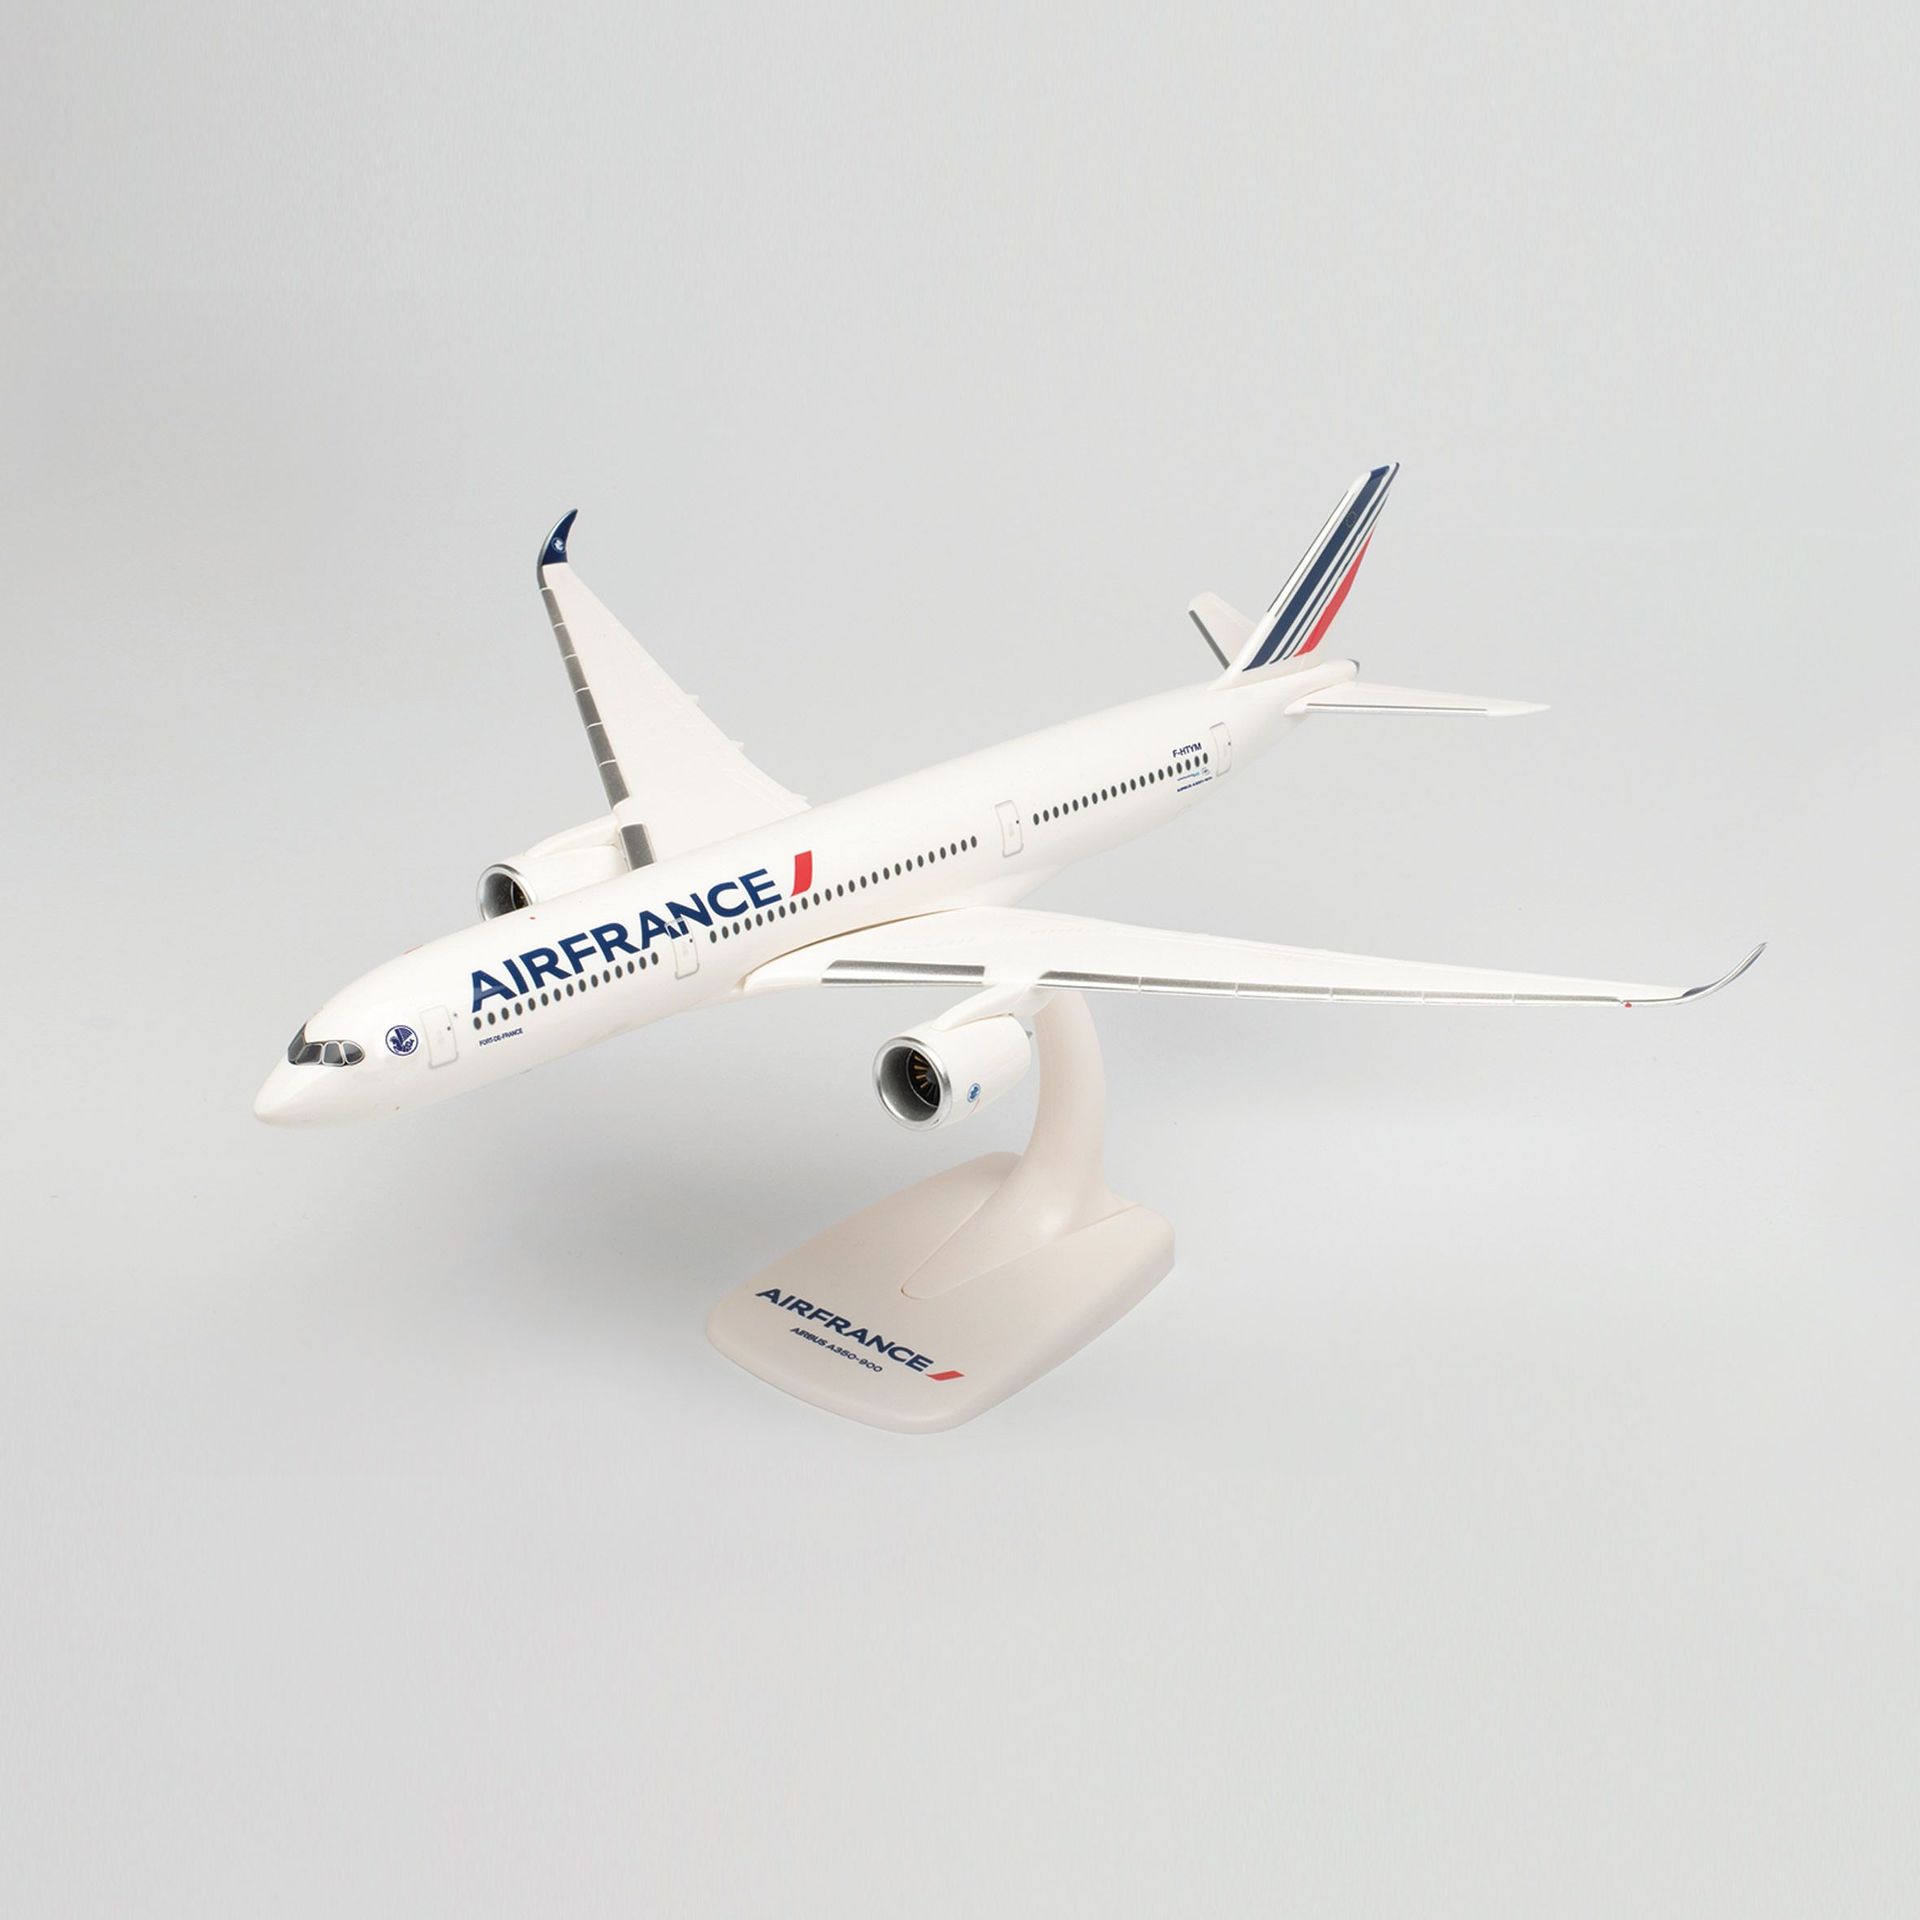 Herpa 612470-001 - Air France Airbus A350-900 - 2021 livery 1:200